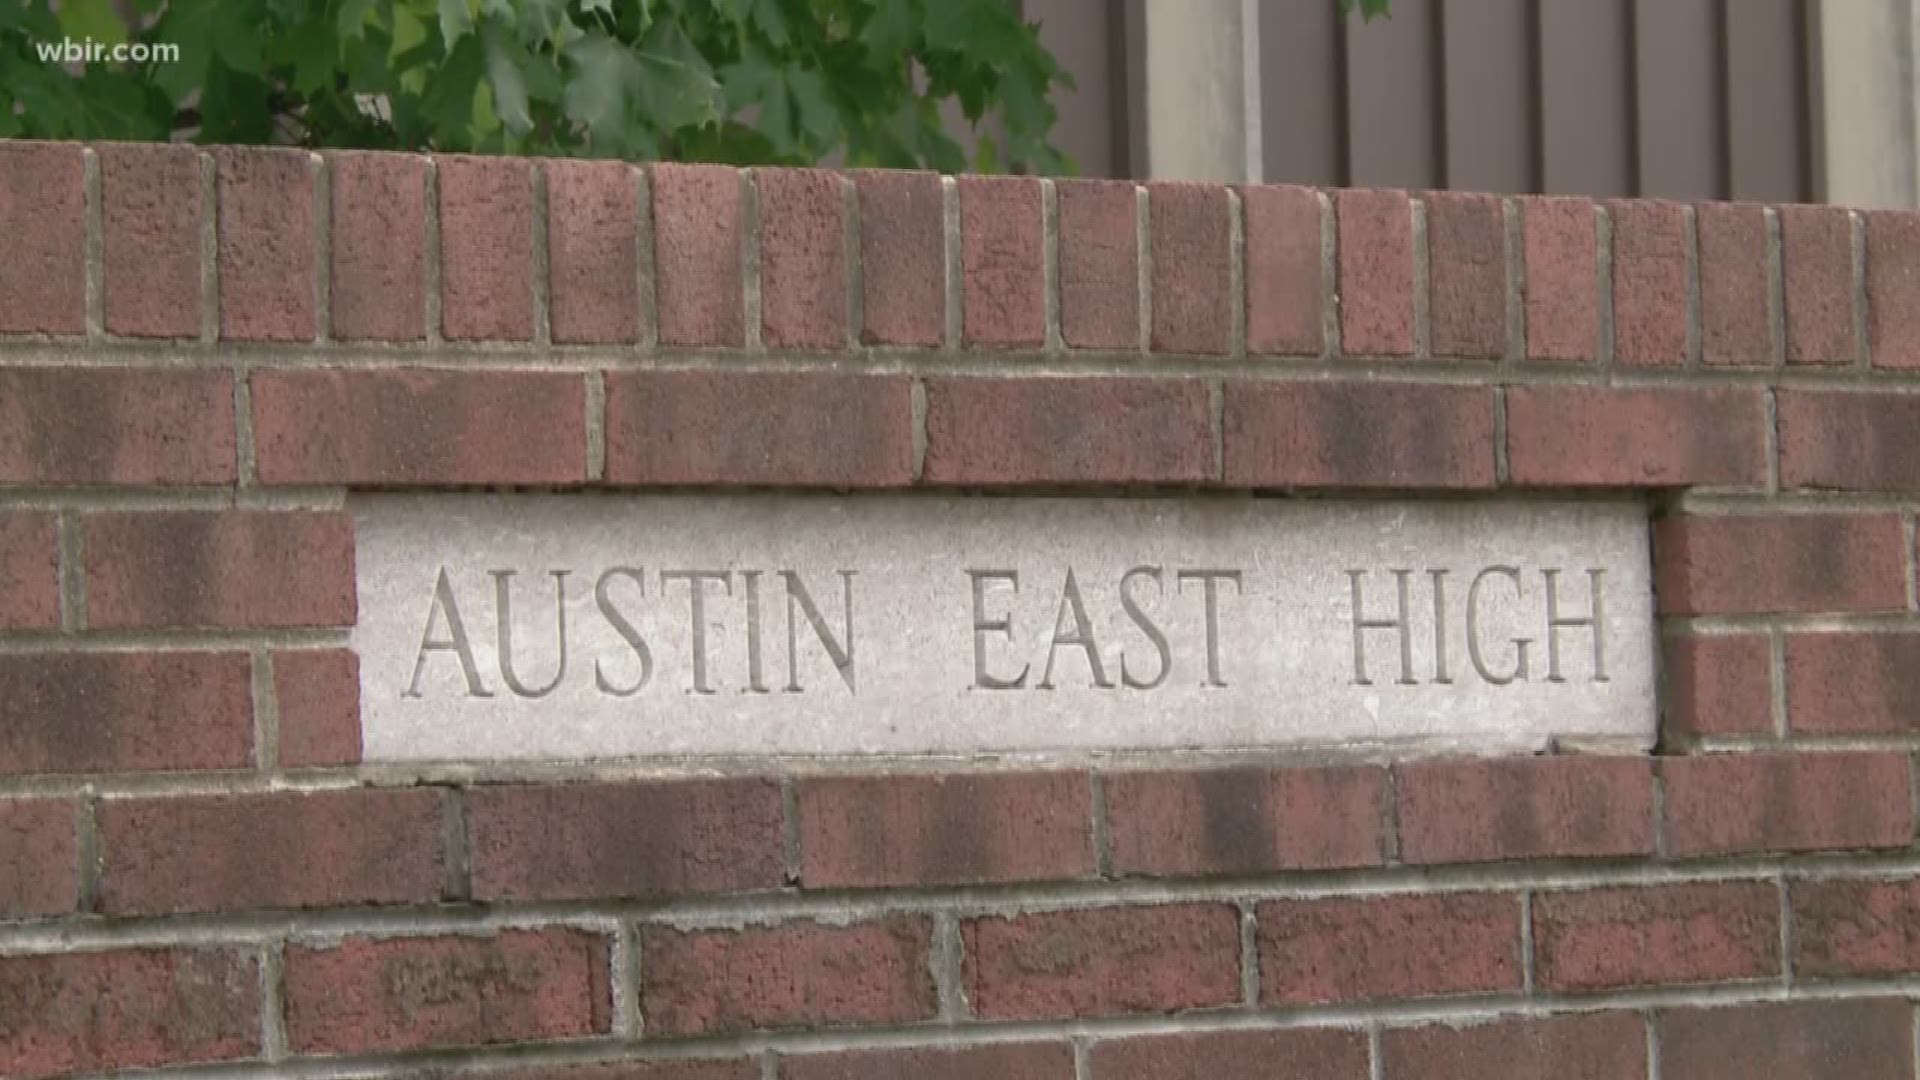 This fall marks the 50th anniversary of the Austin-East High School merge that promoted desegregation within the district.